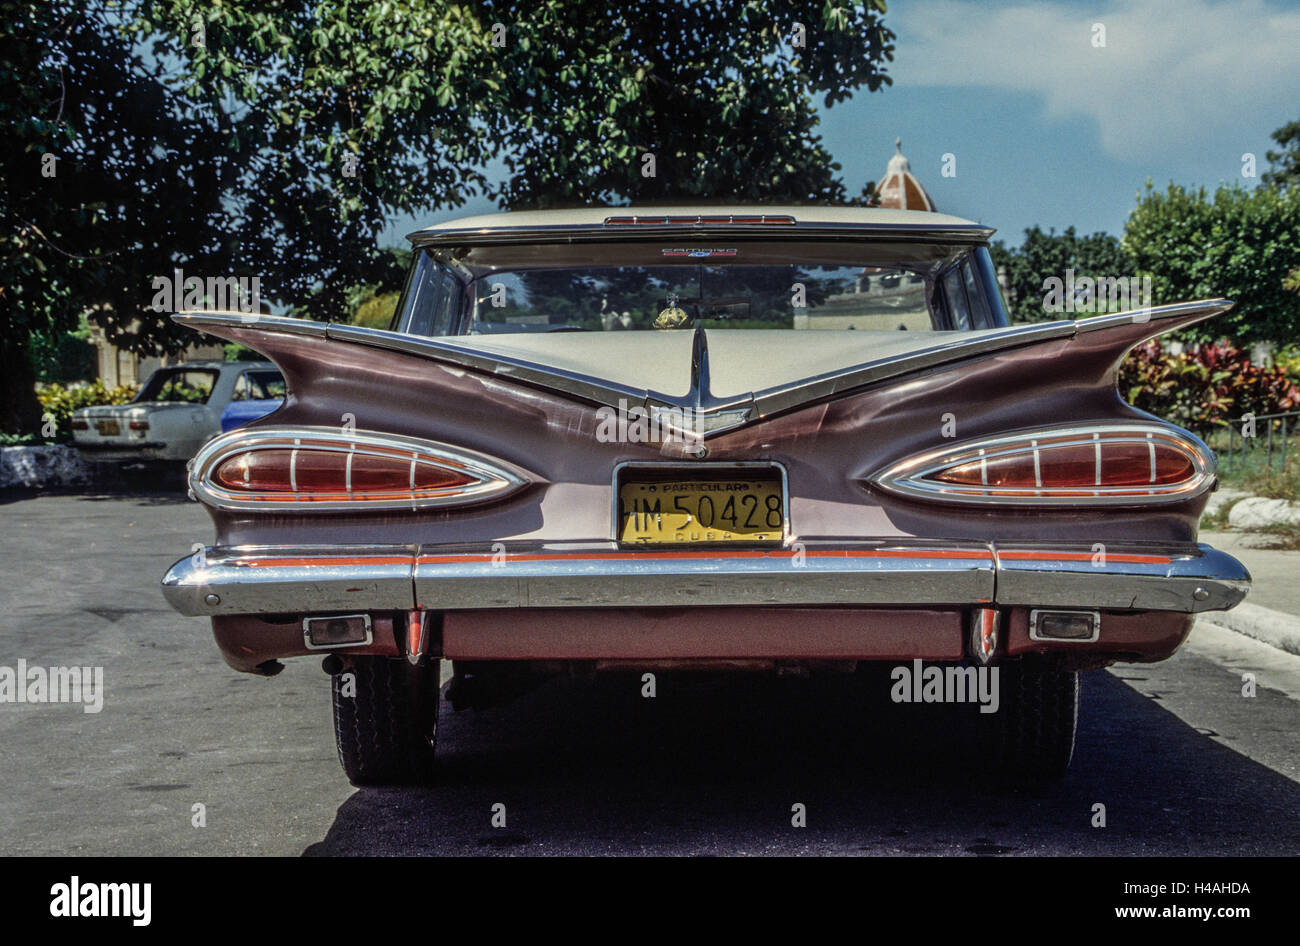 Detail of vintage car in Cuba, rear view Stock Photo